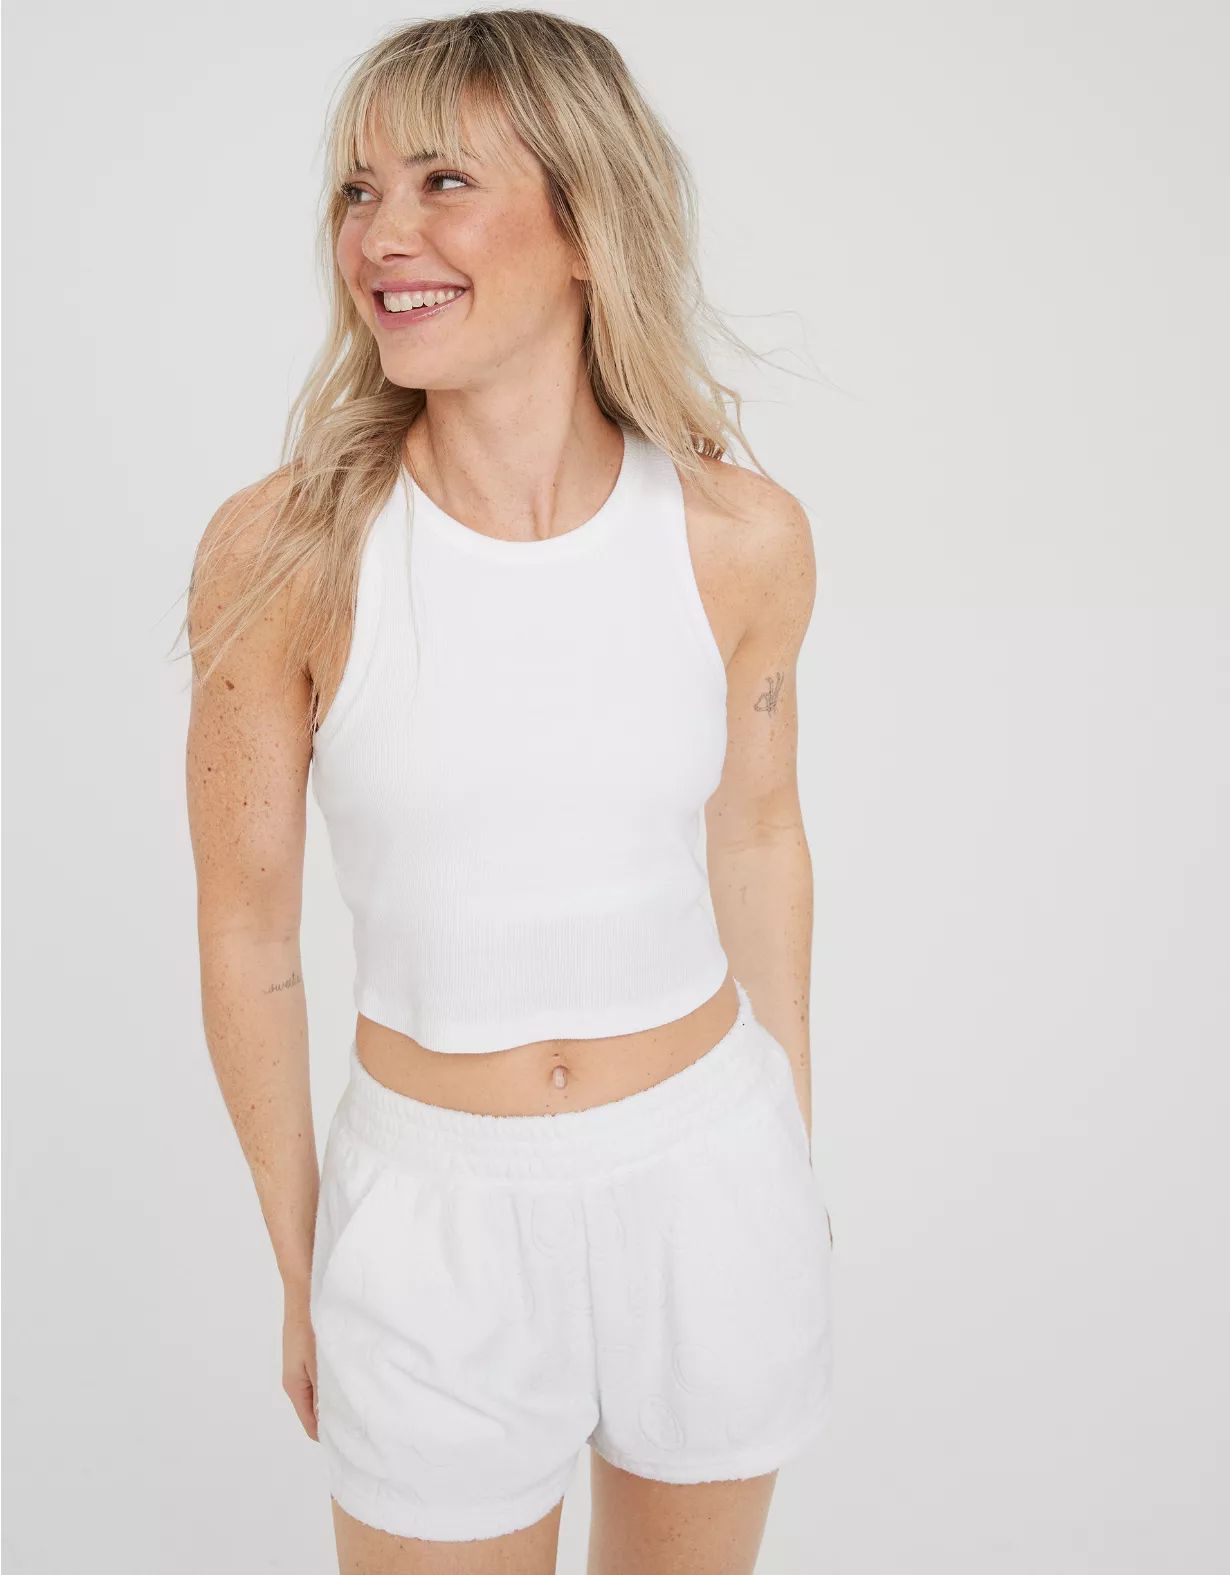 OFFLINE By Aerie Not Basic Tank Top | Aerie